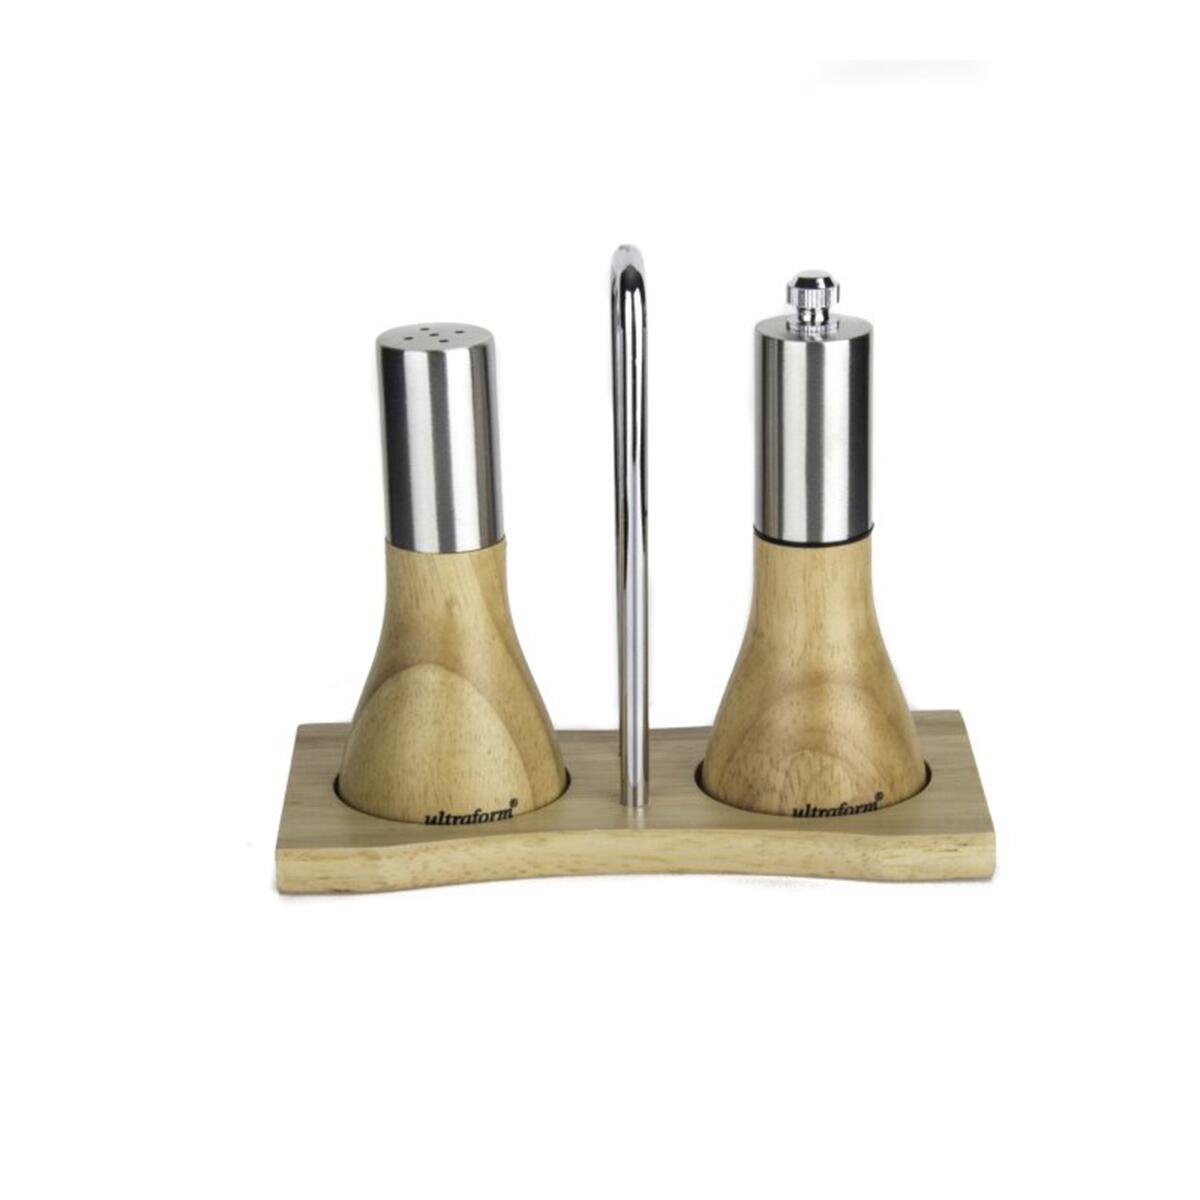 Ultraform Wooden Stand Salt and Pepper Shakers